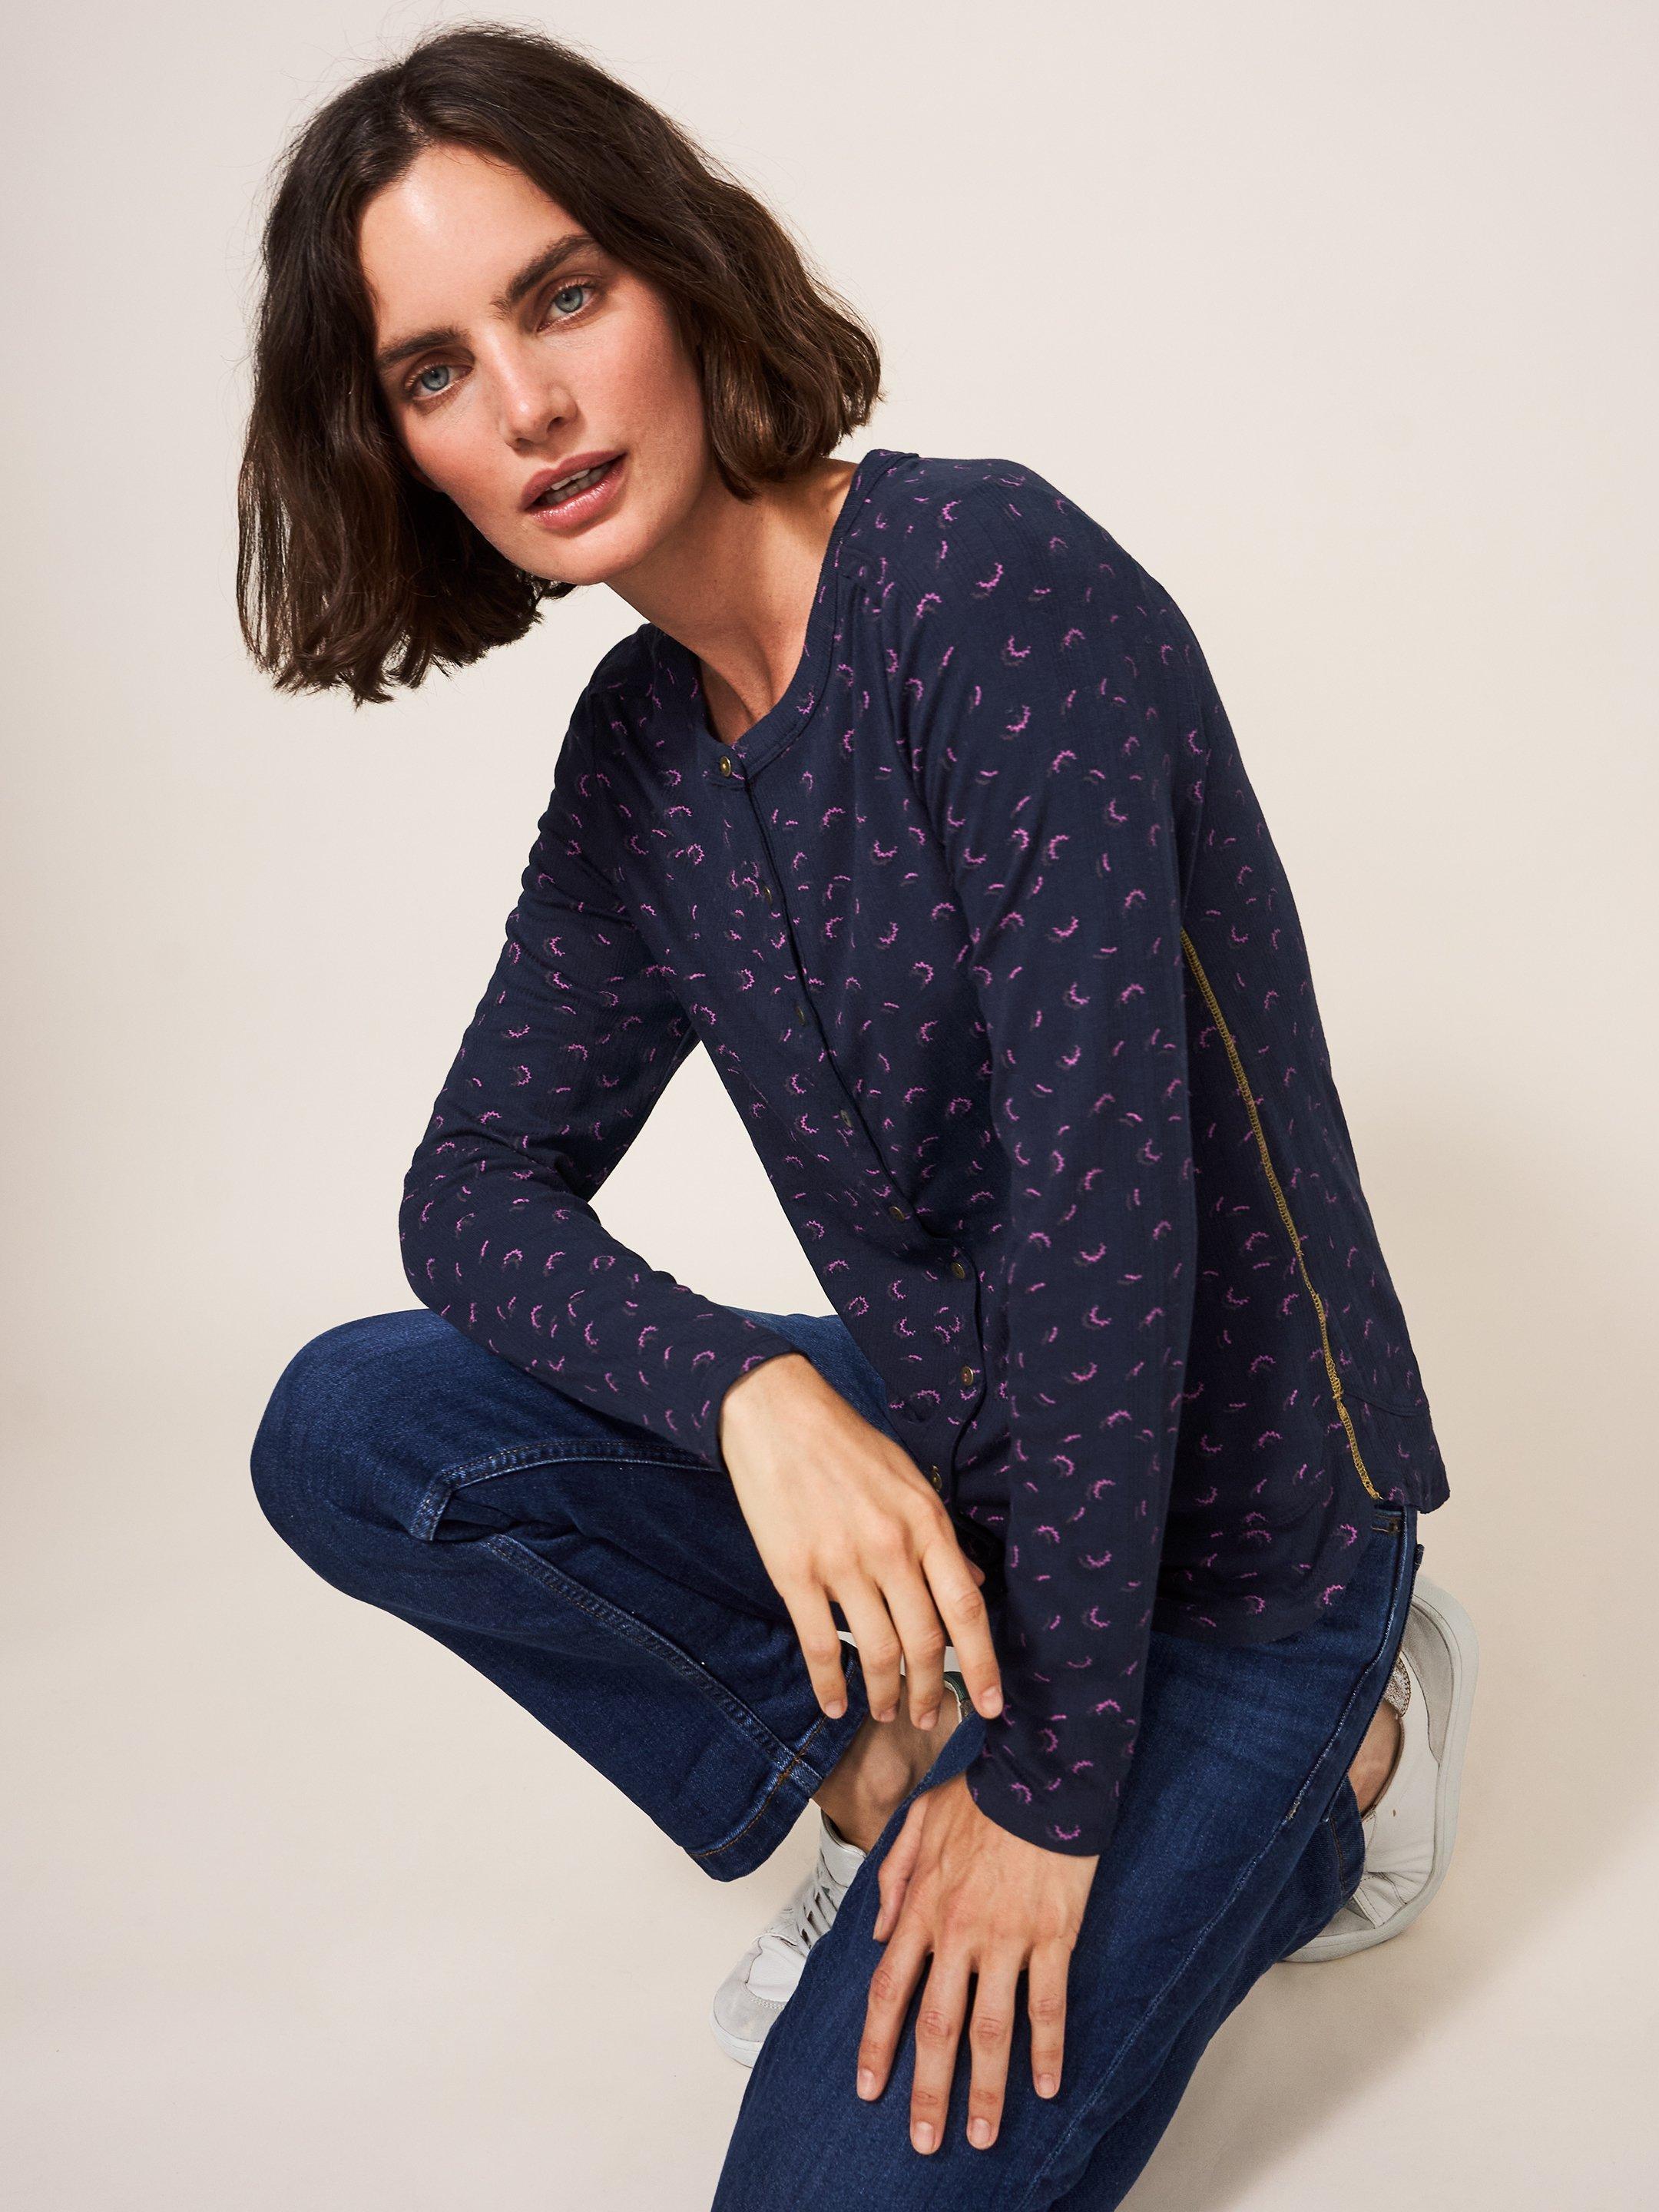 Bobbi Button Jersey Top in NAVY MULTI - LIFESTYLE